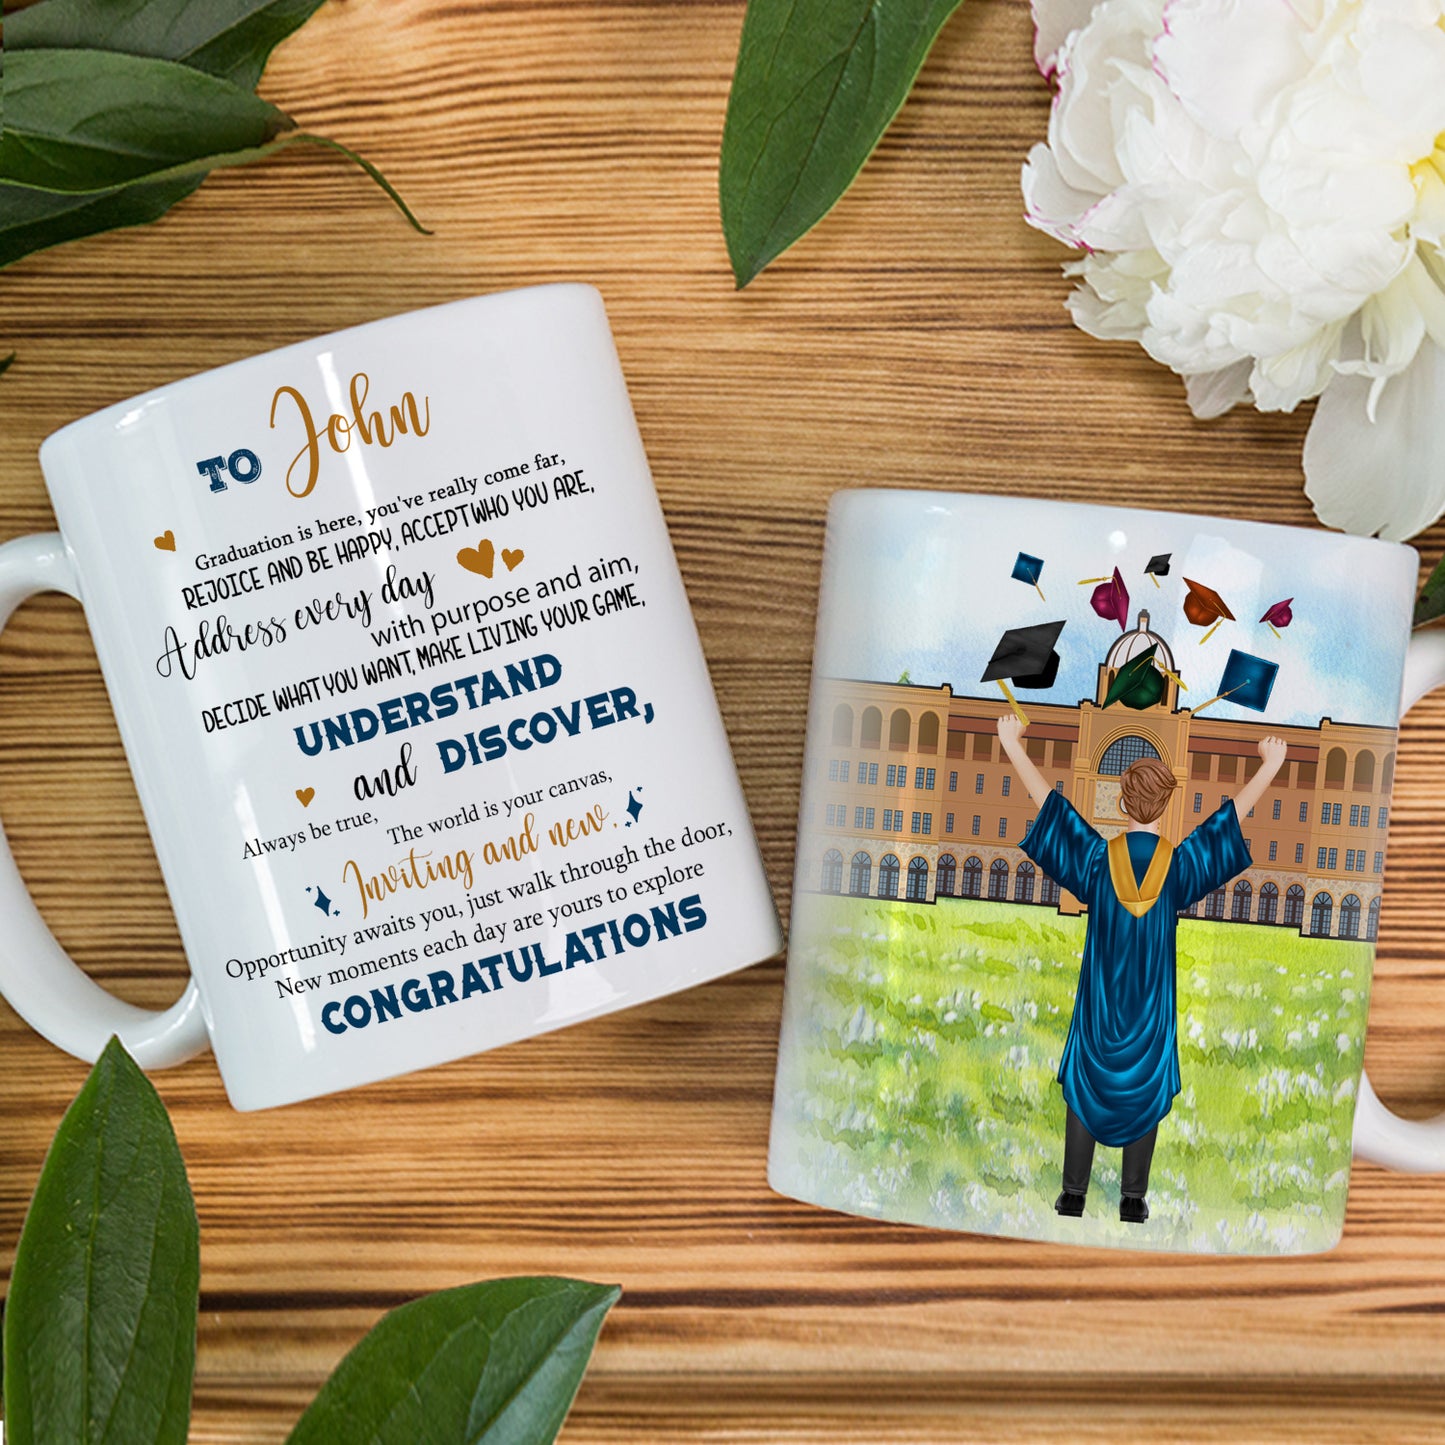 Custom Personalized Coffee mug graduation gifts for him & her, best college, high school grad presents for girls, boys, friends - Graduation is here, you‘ve really come far D1641 - PersonalizedWitch